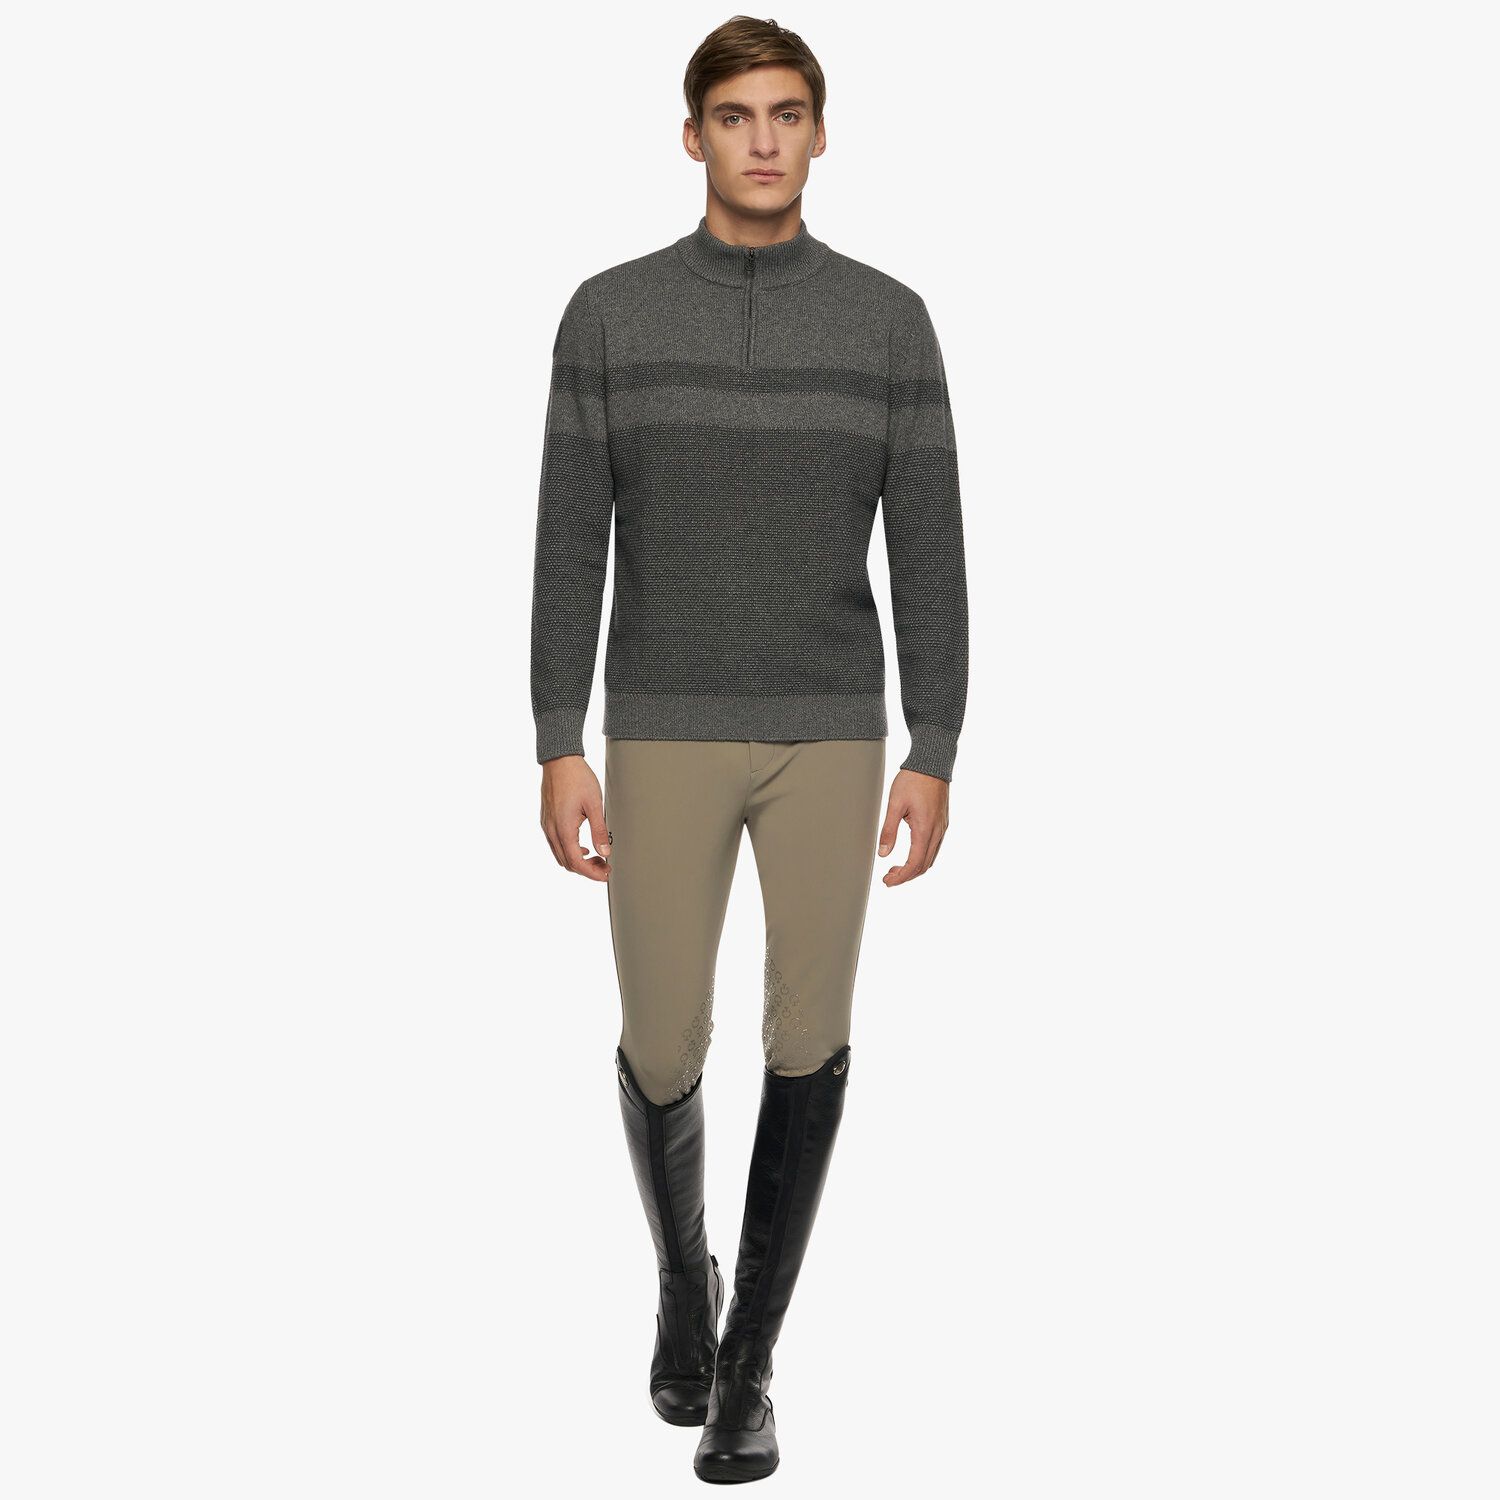 Cavalleria Toscana Men’s wool jumper with a high neck and zip CHARCOAL GREY-2